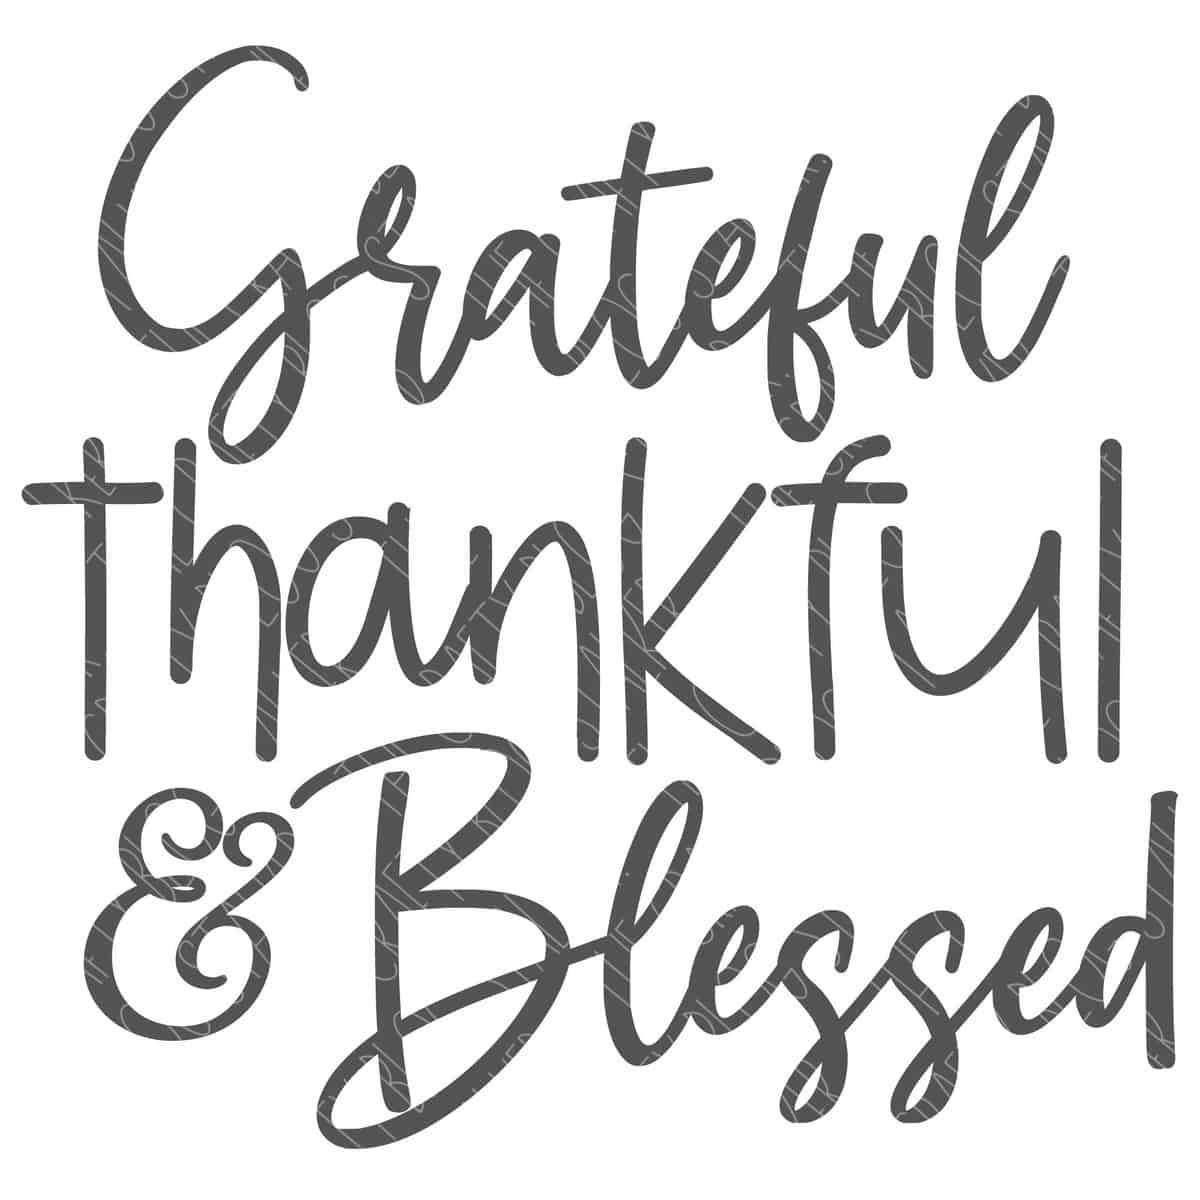 Grateful Thankful and Blessed SVG	

			
		
	

		
			$3.00 – Buy Now Checkout
							
					
						
							
						
						Added to cart